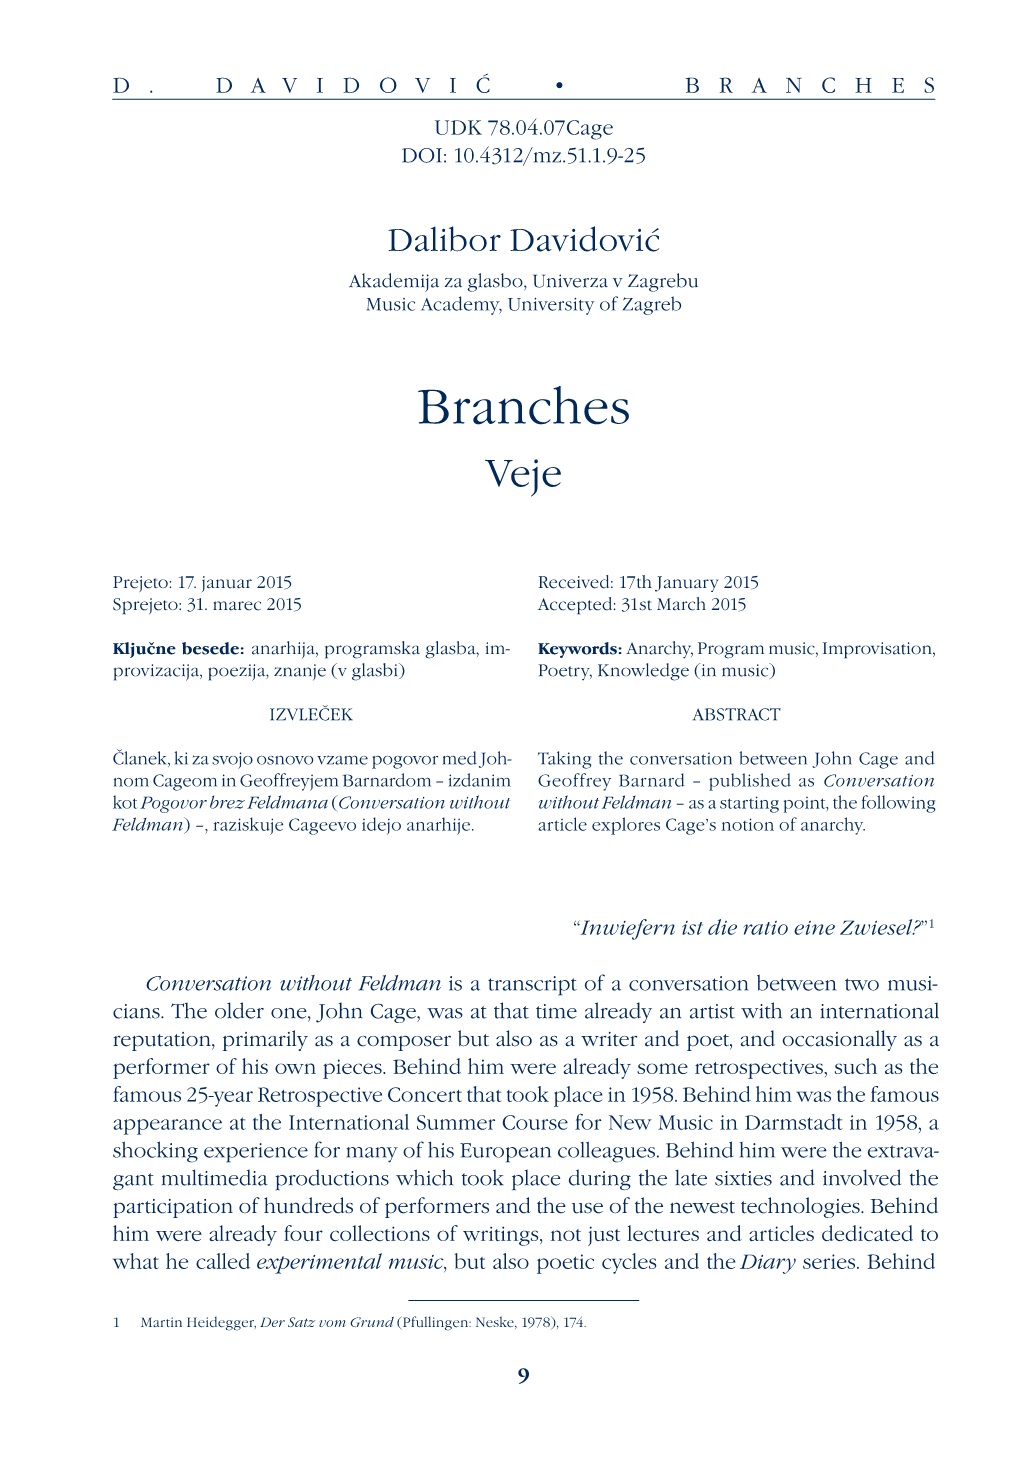 BRANCHES UDK 78.04.07Cage DOI: 10.4312/Mz.51.1.9-25